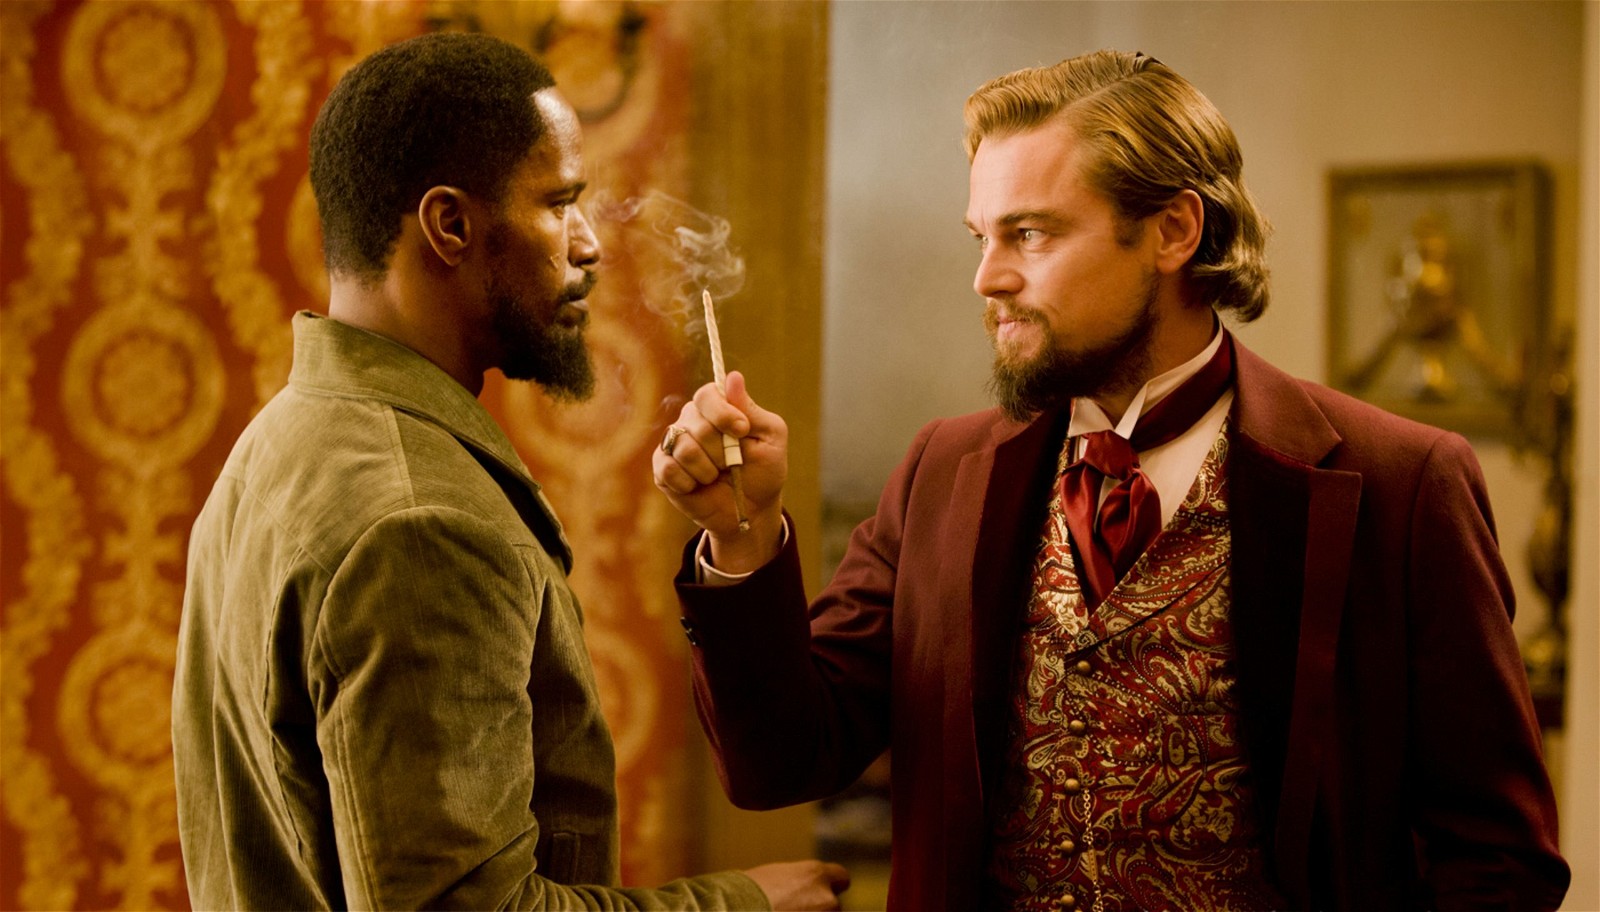 2012 Django Unchained remains the highest grossing film of The Weinstein Company